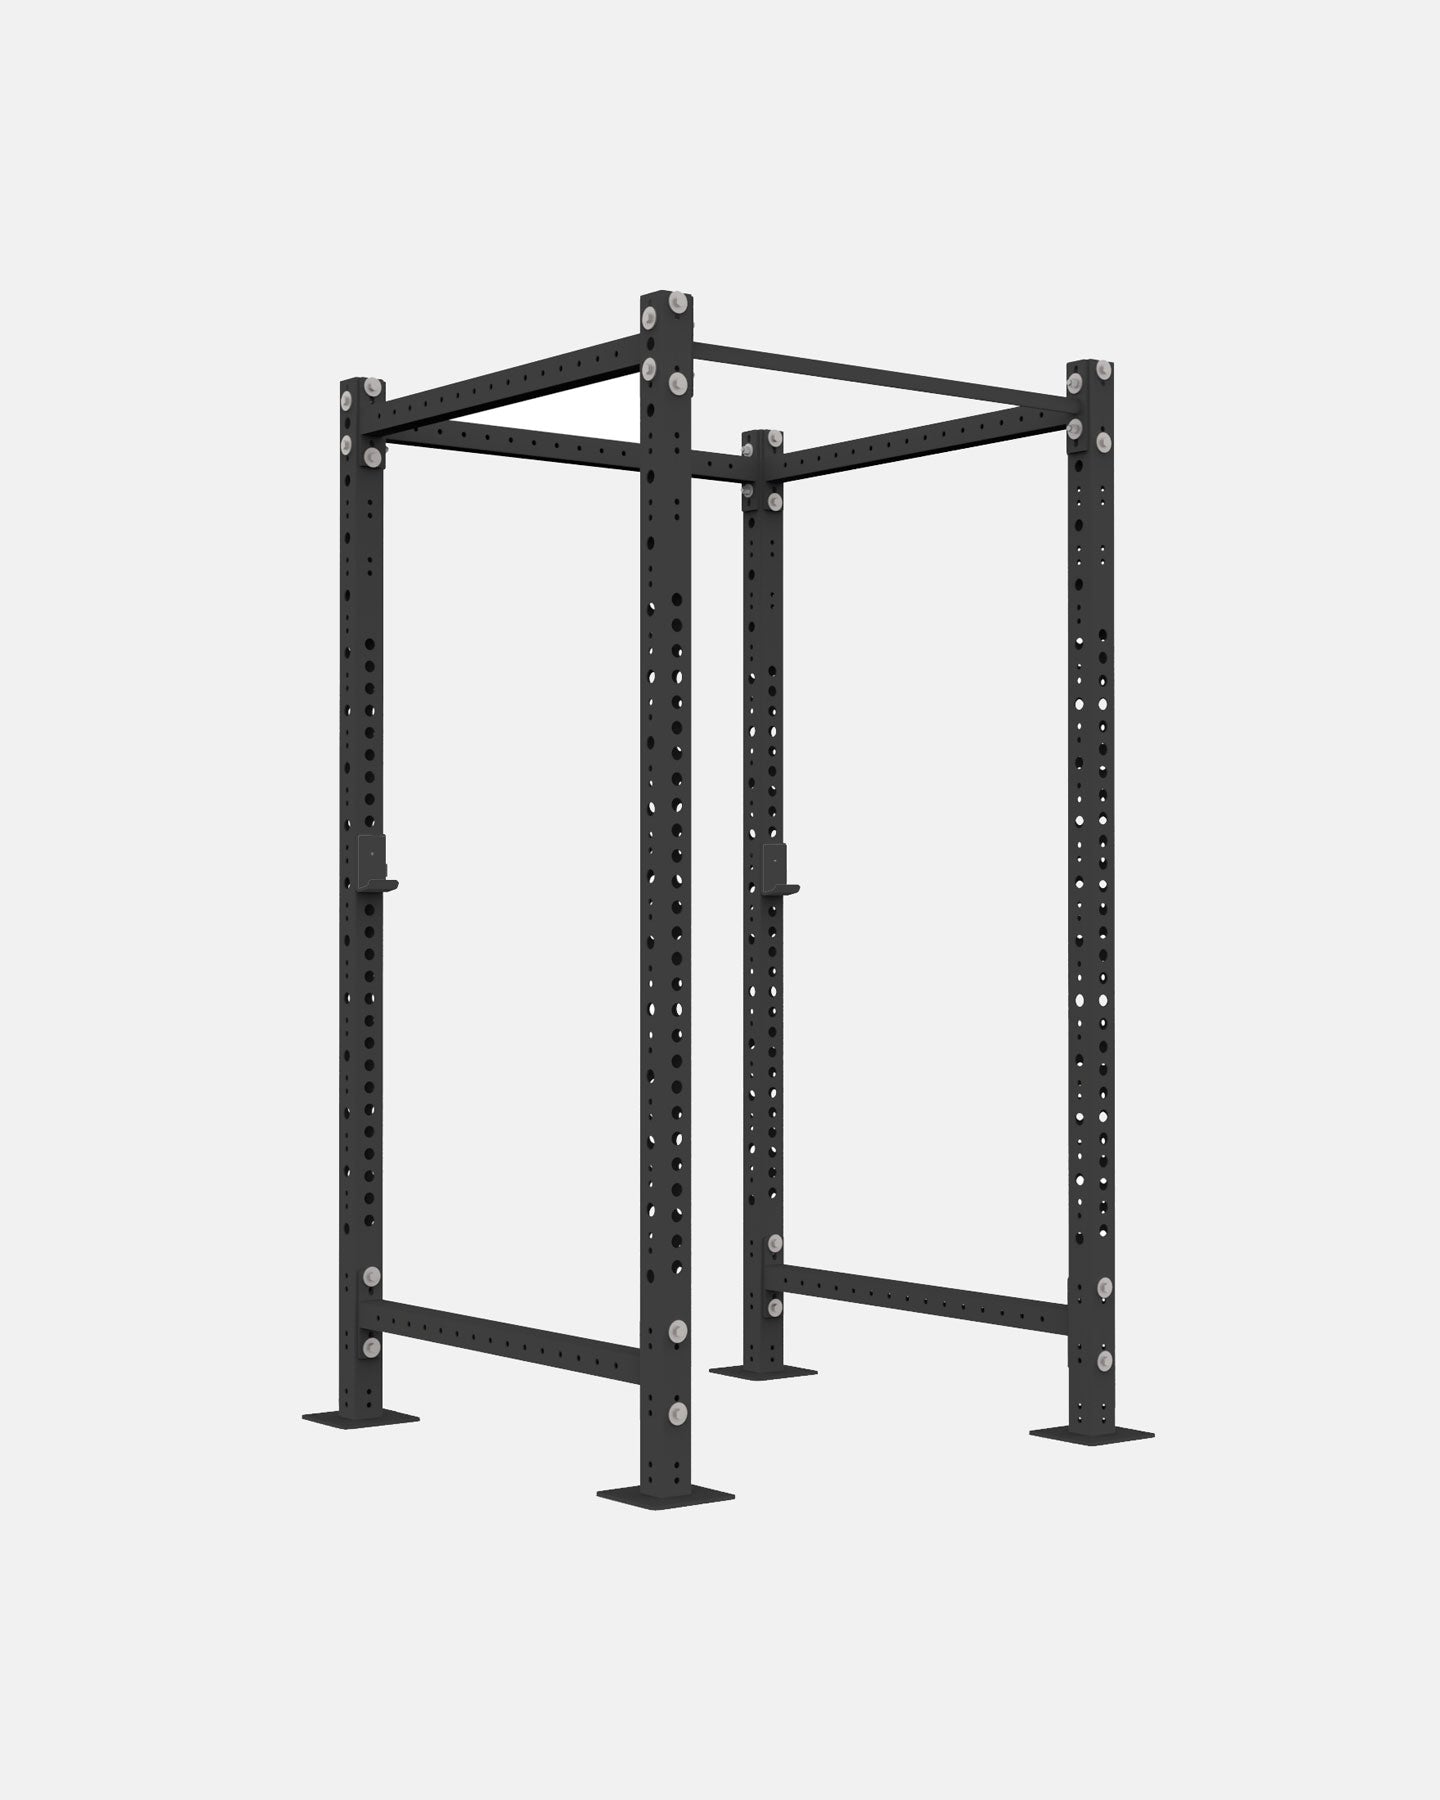 4x4 power rack for home gym